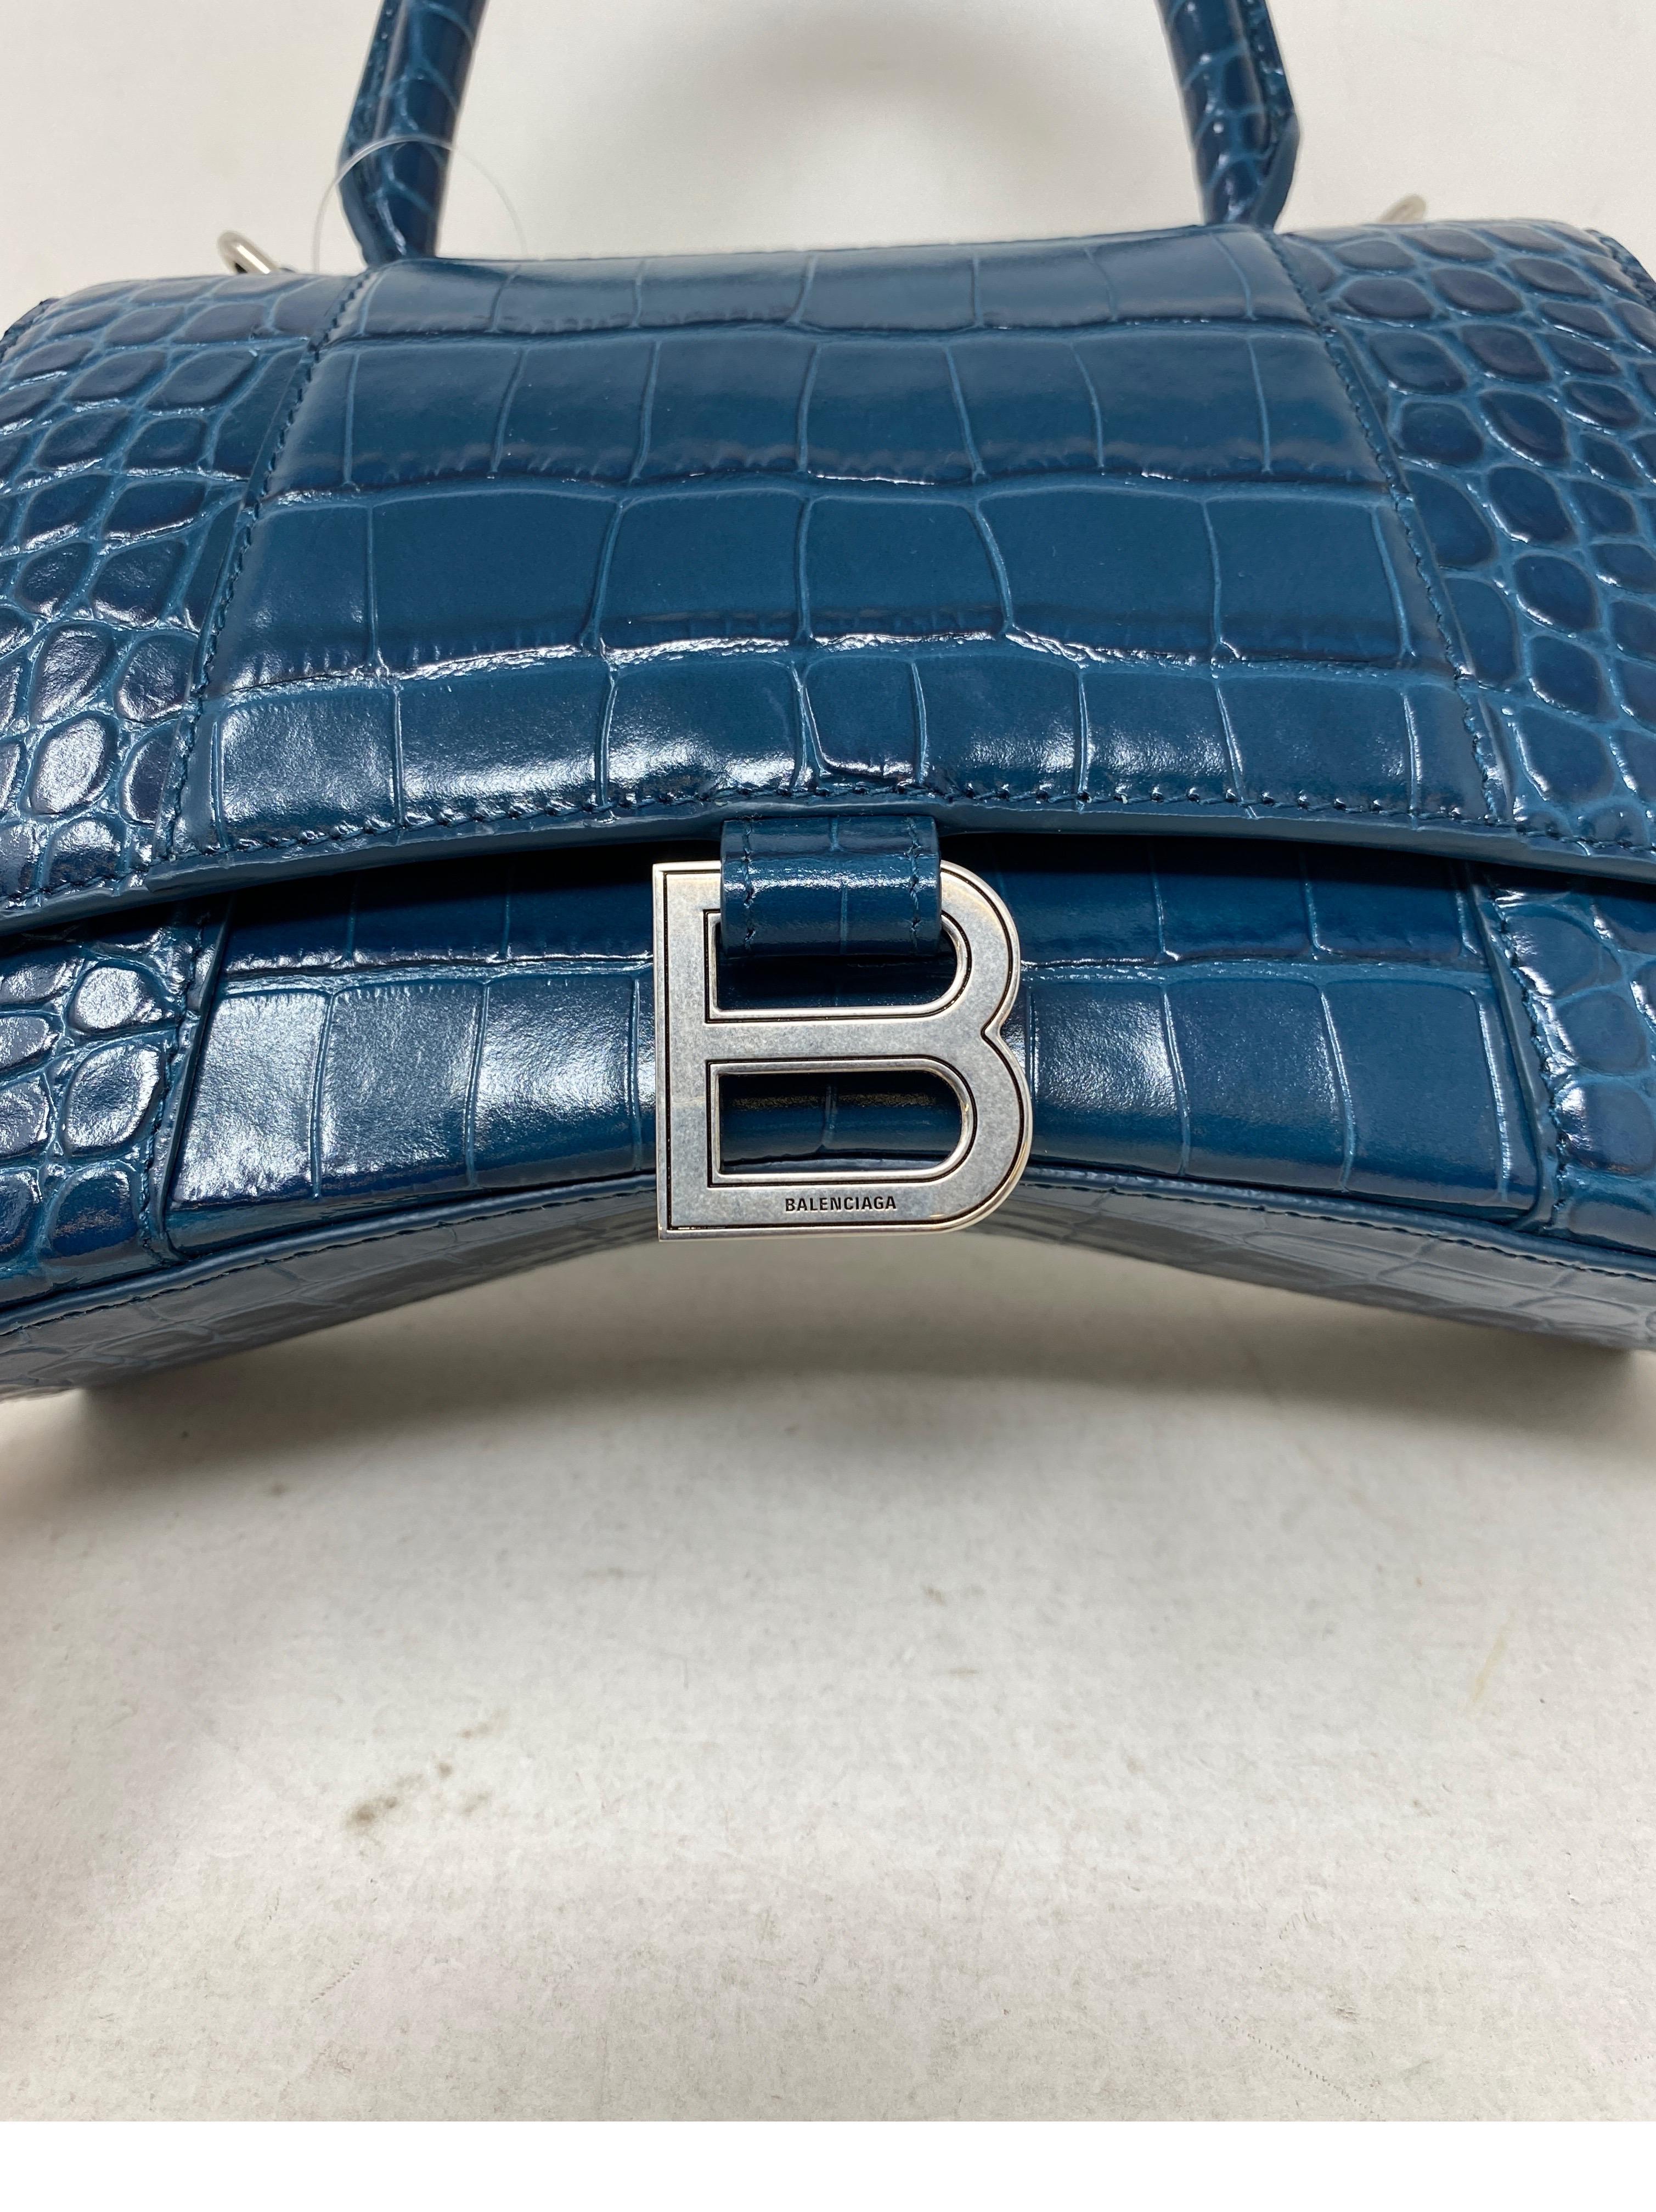 Balenciaga Blue Croc Embossed Hourglass Bag. Small size hourglass bag. Beautiful blue leather. Silver hardware. Unique bag by Balenciaga. Includes dust cover. New with tags. Guaranteed authentic. 